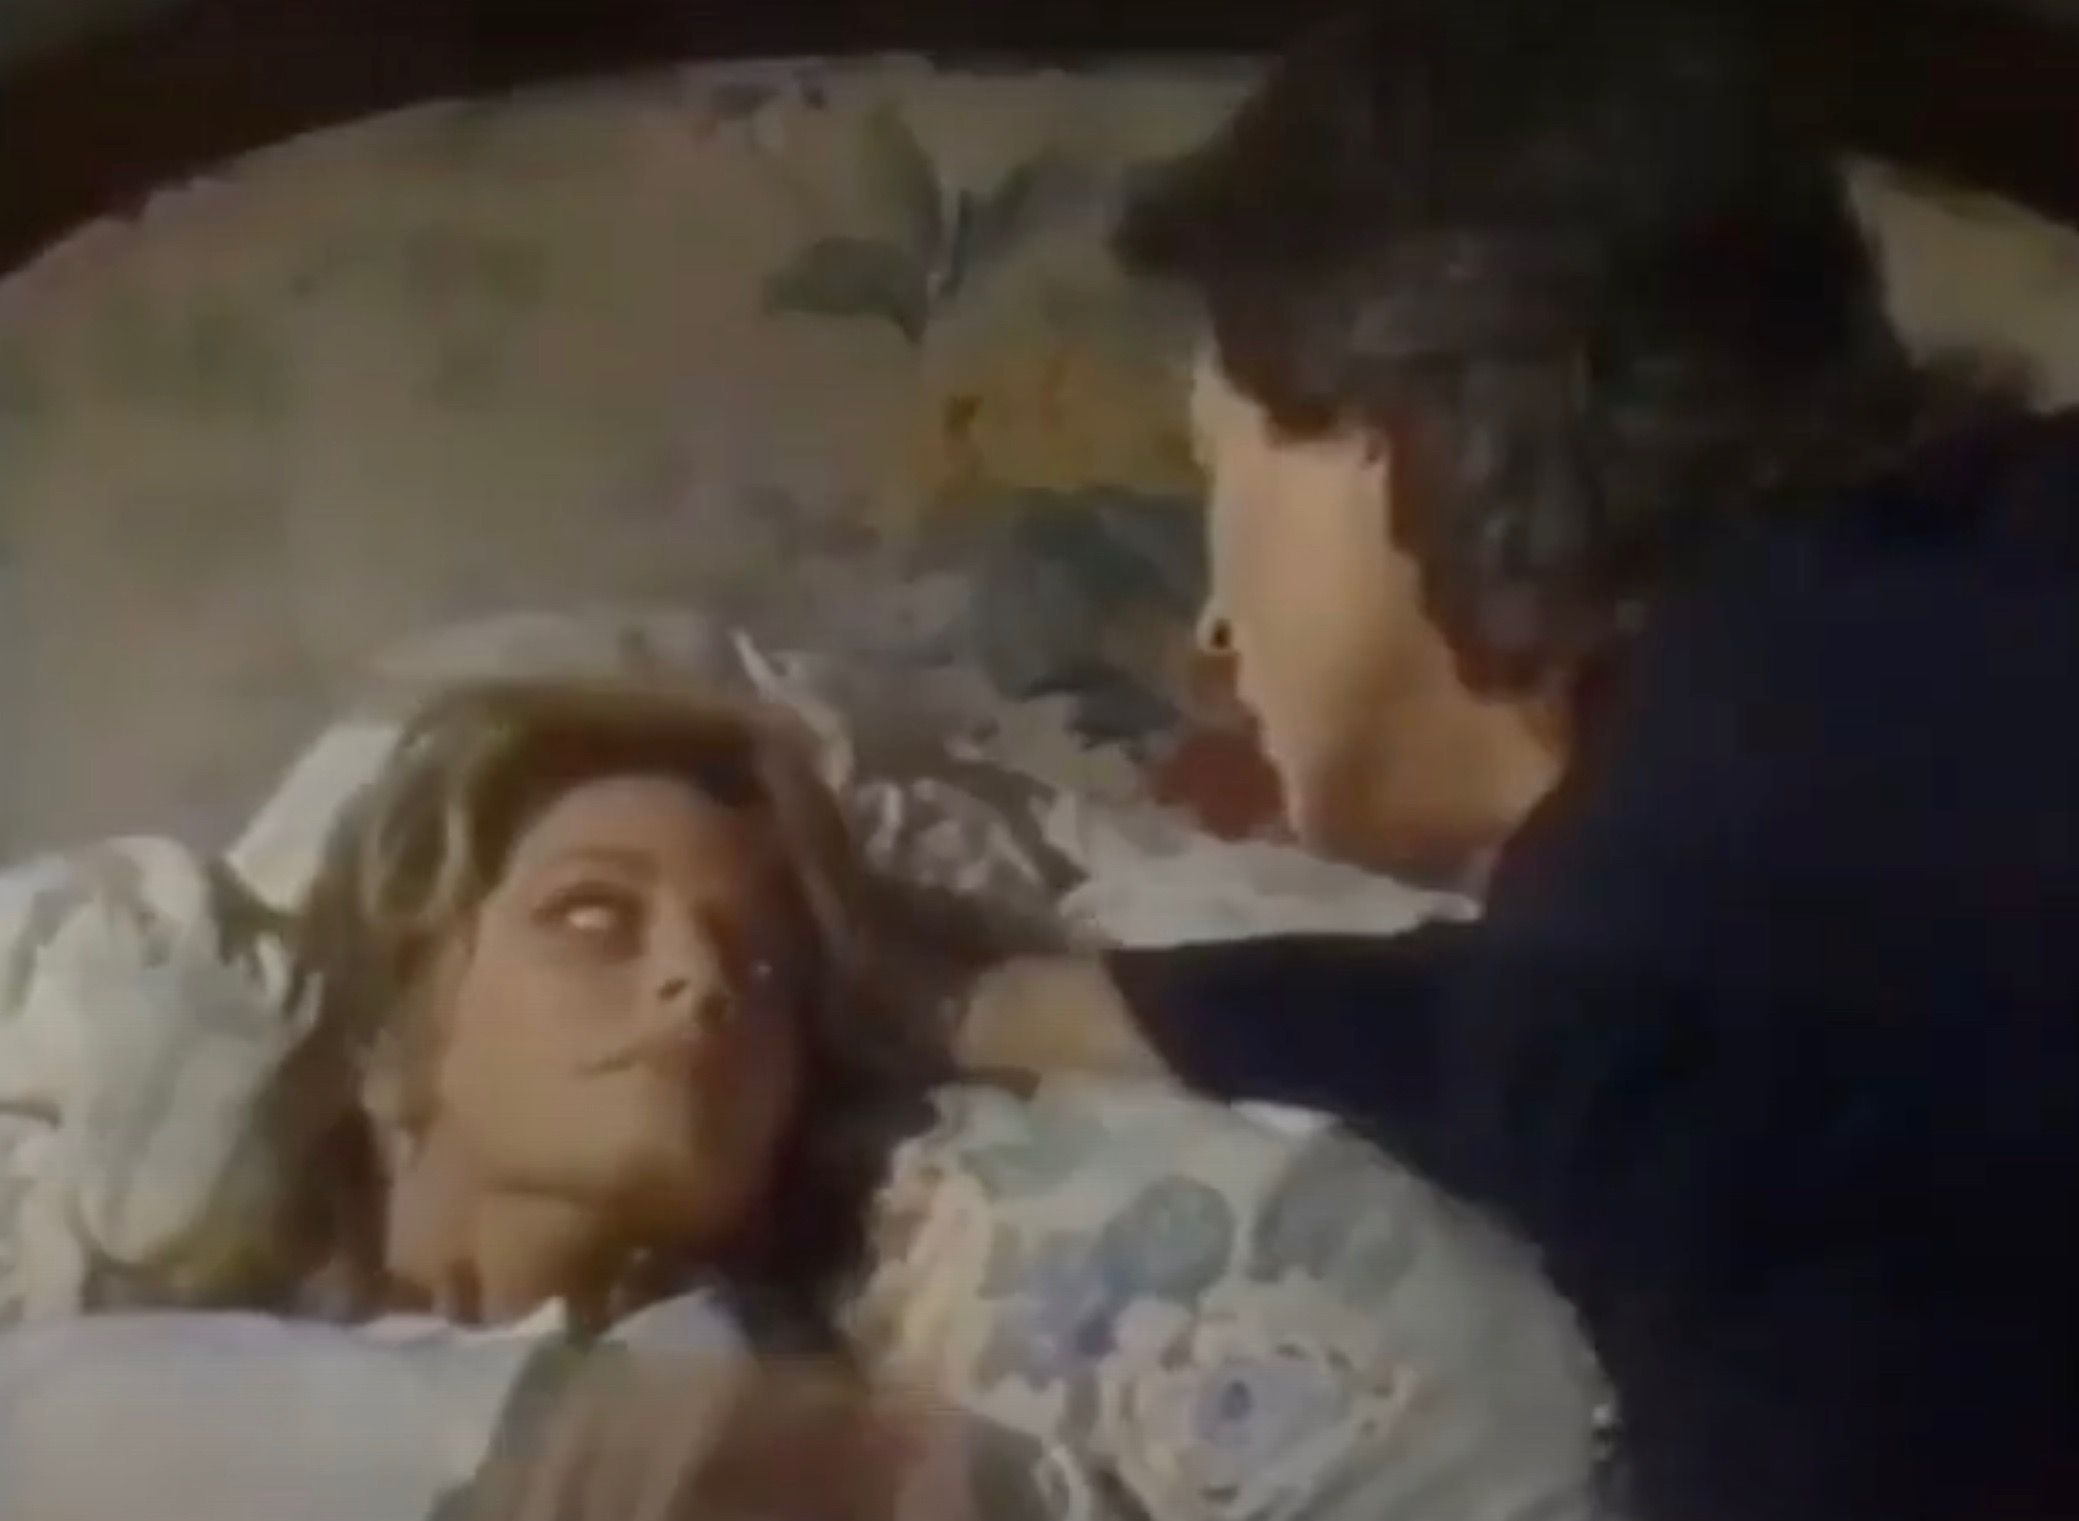 Marlena possessed looking at the priest who's putting his hand on her head in Days Of Our Lives.